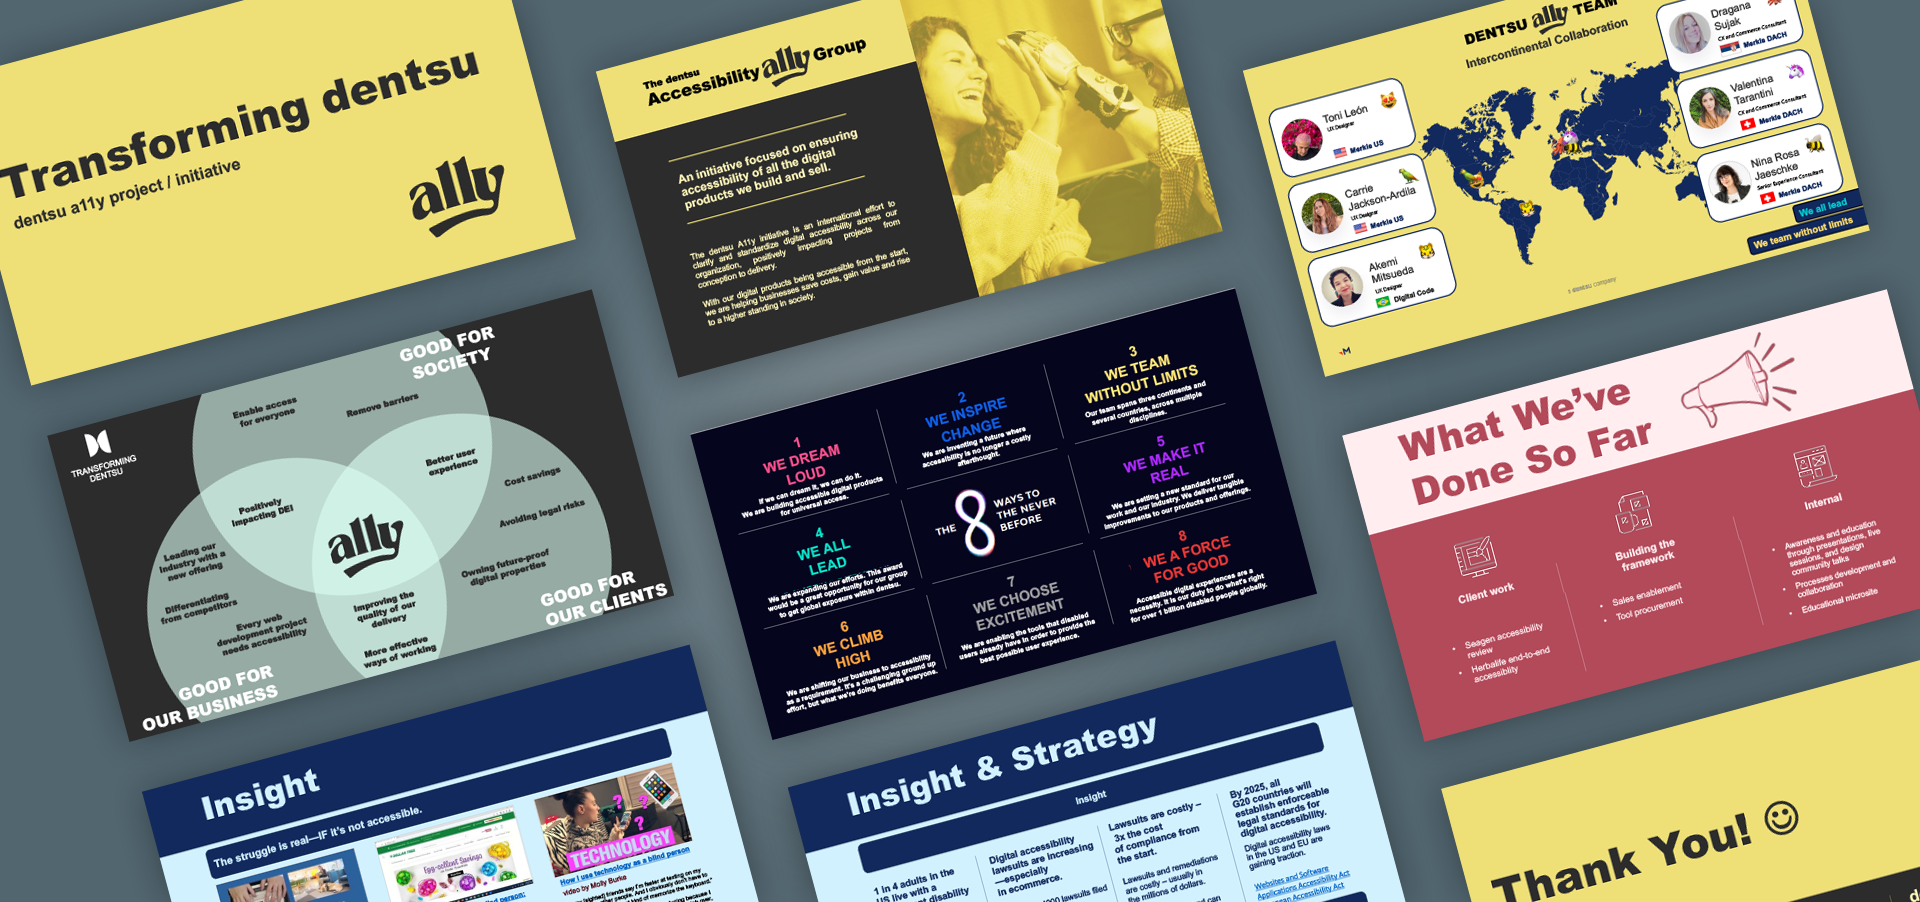 Colorful presentation slides outlining the case study, members of the group, and the eight ways that the A11y project delivers on digital transformation